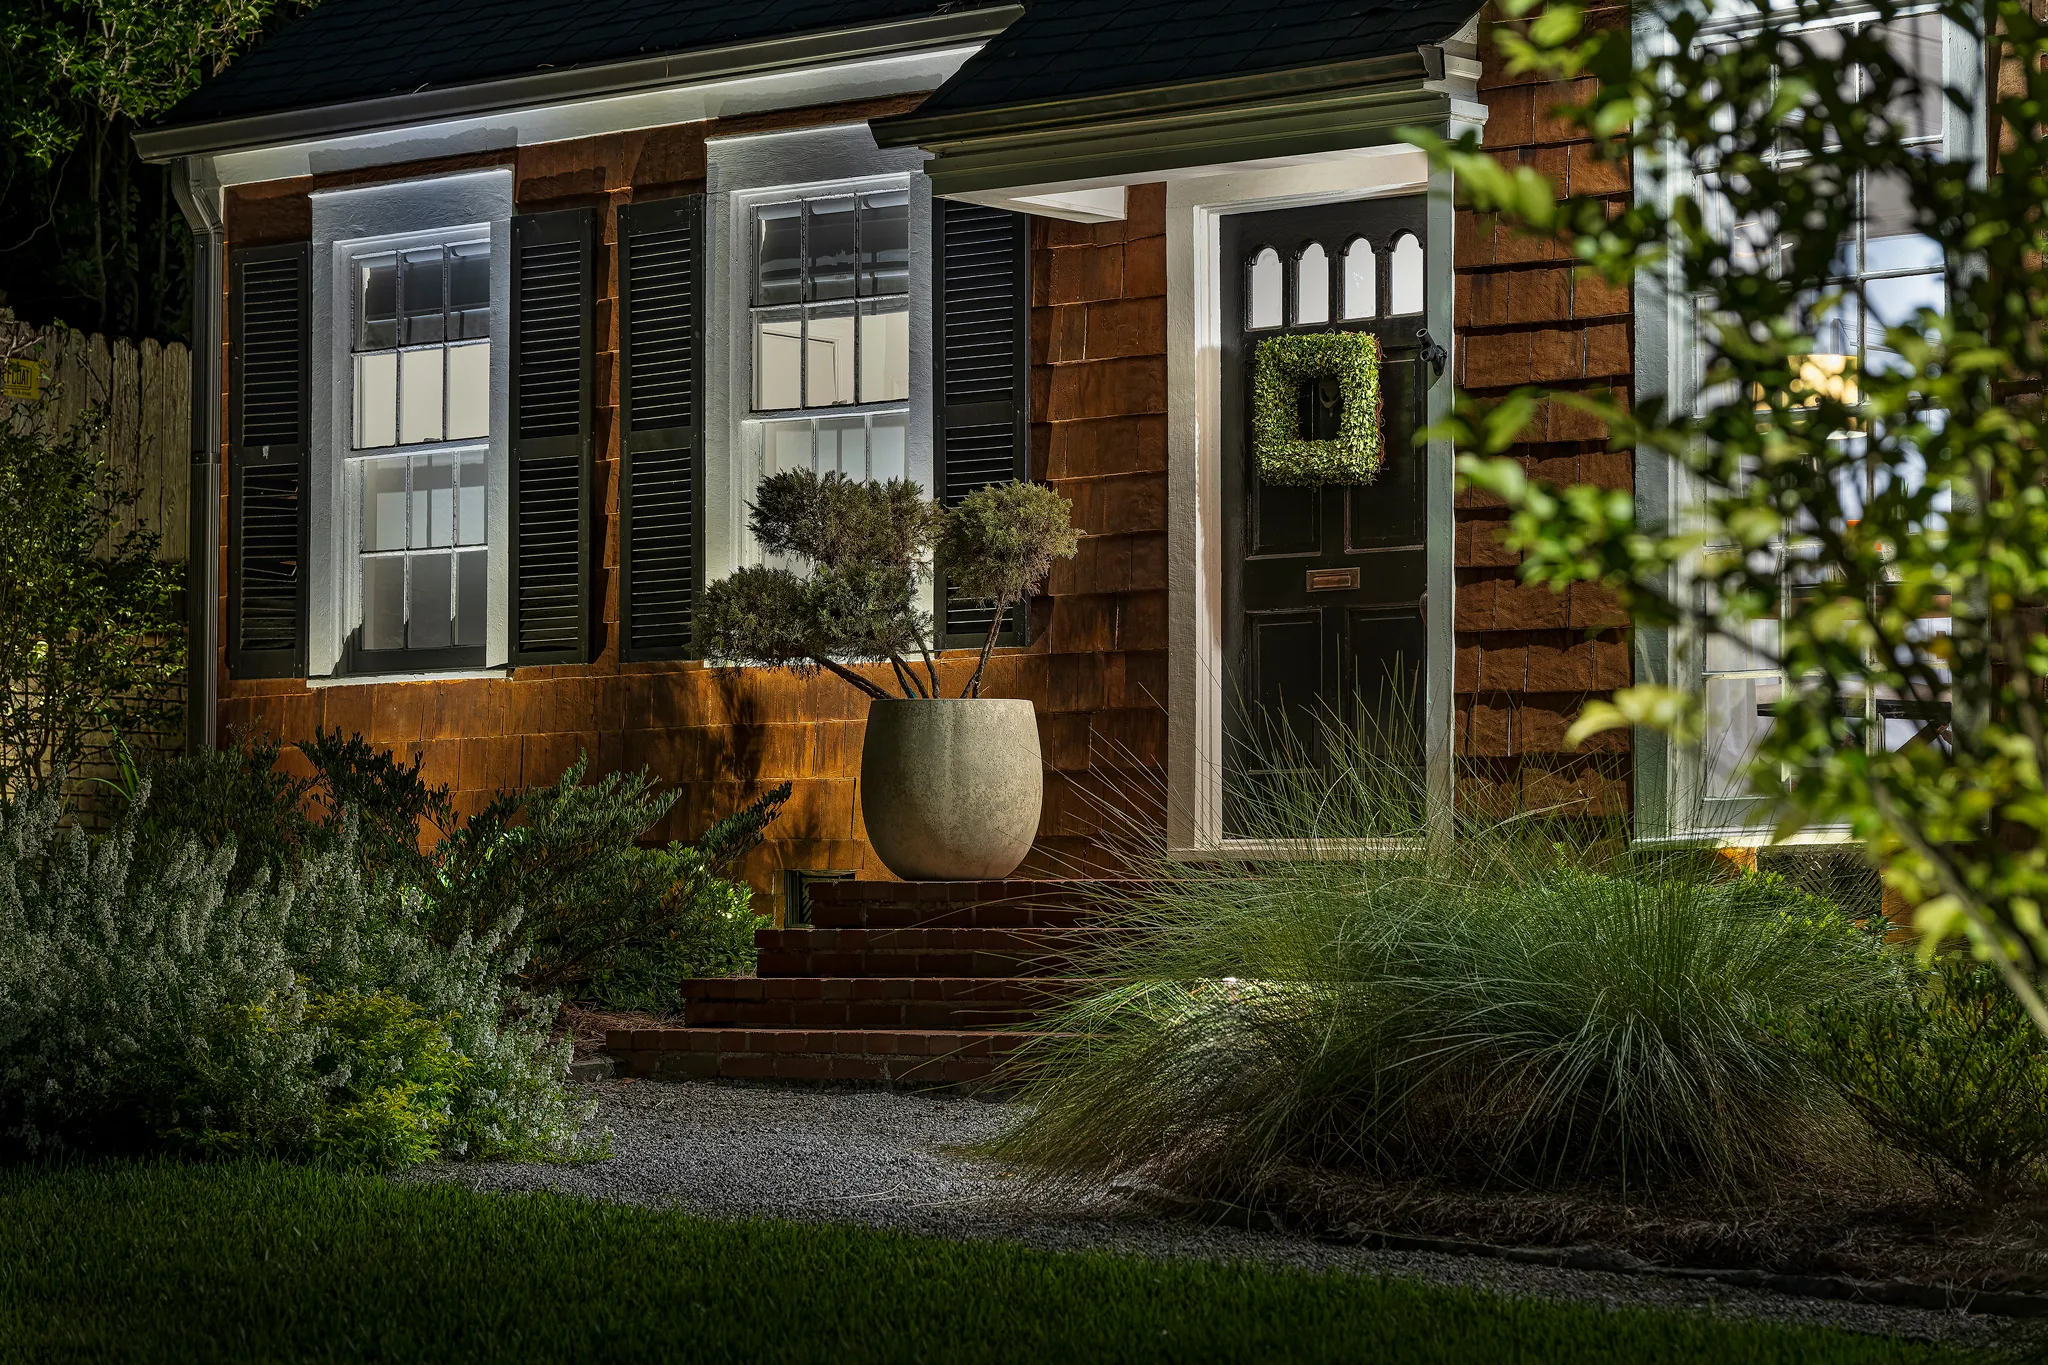 Residential Outdoor Lighting Design Services in Cherry Hills Village, CO